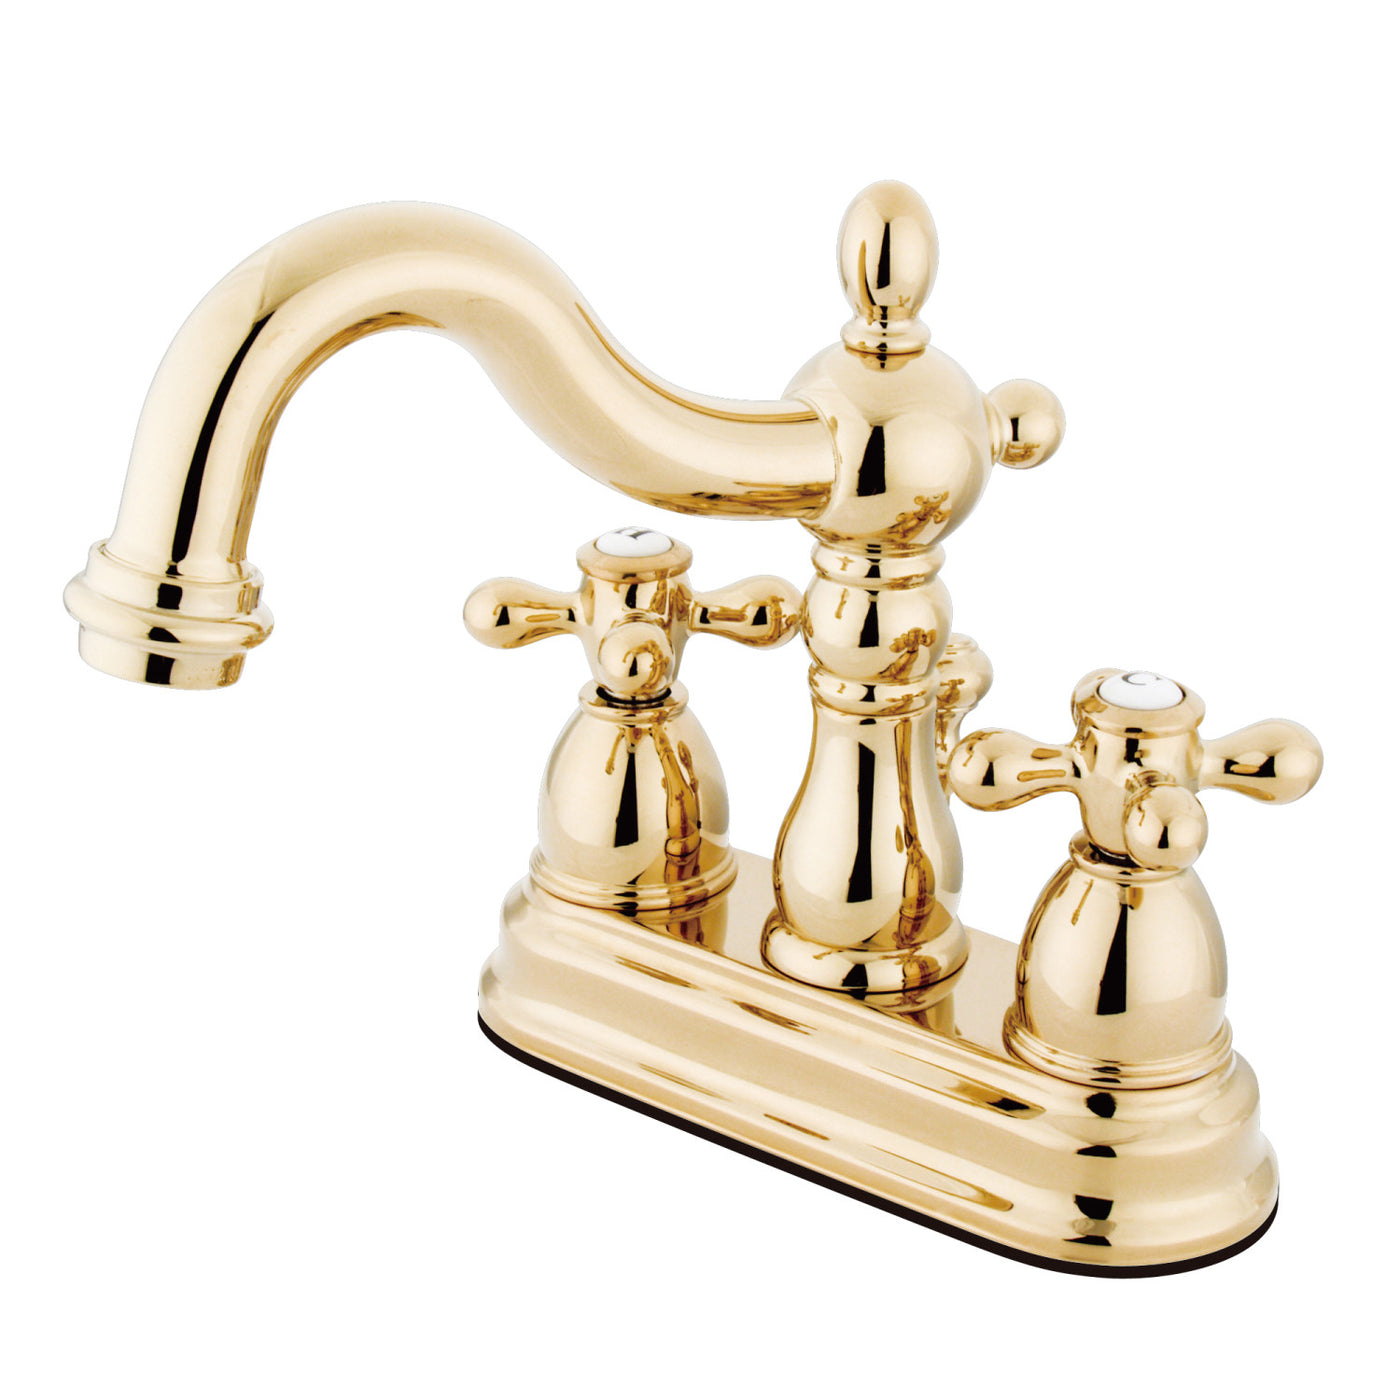 Elements of Design ES1602AX 4-Inch Centerset Bathroom Faucet, Polished Brass